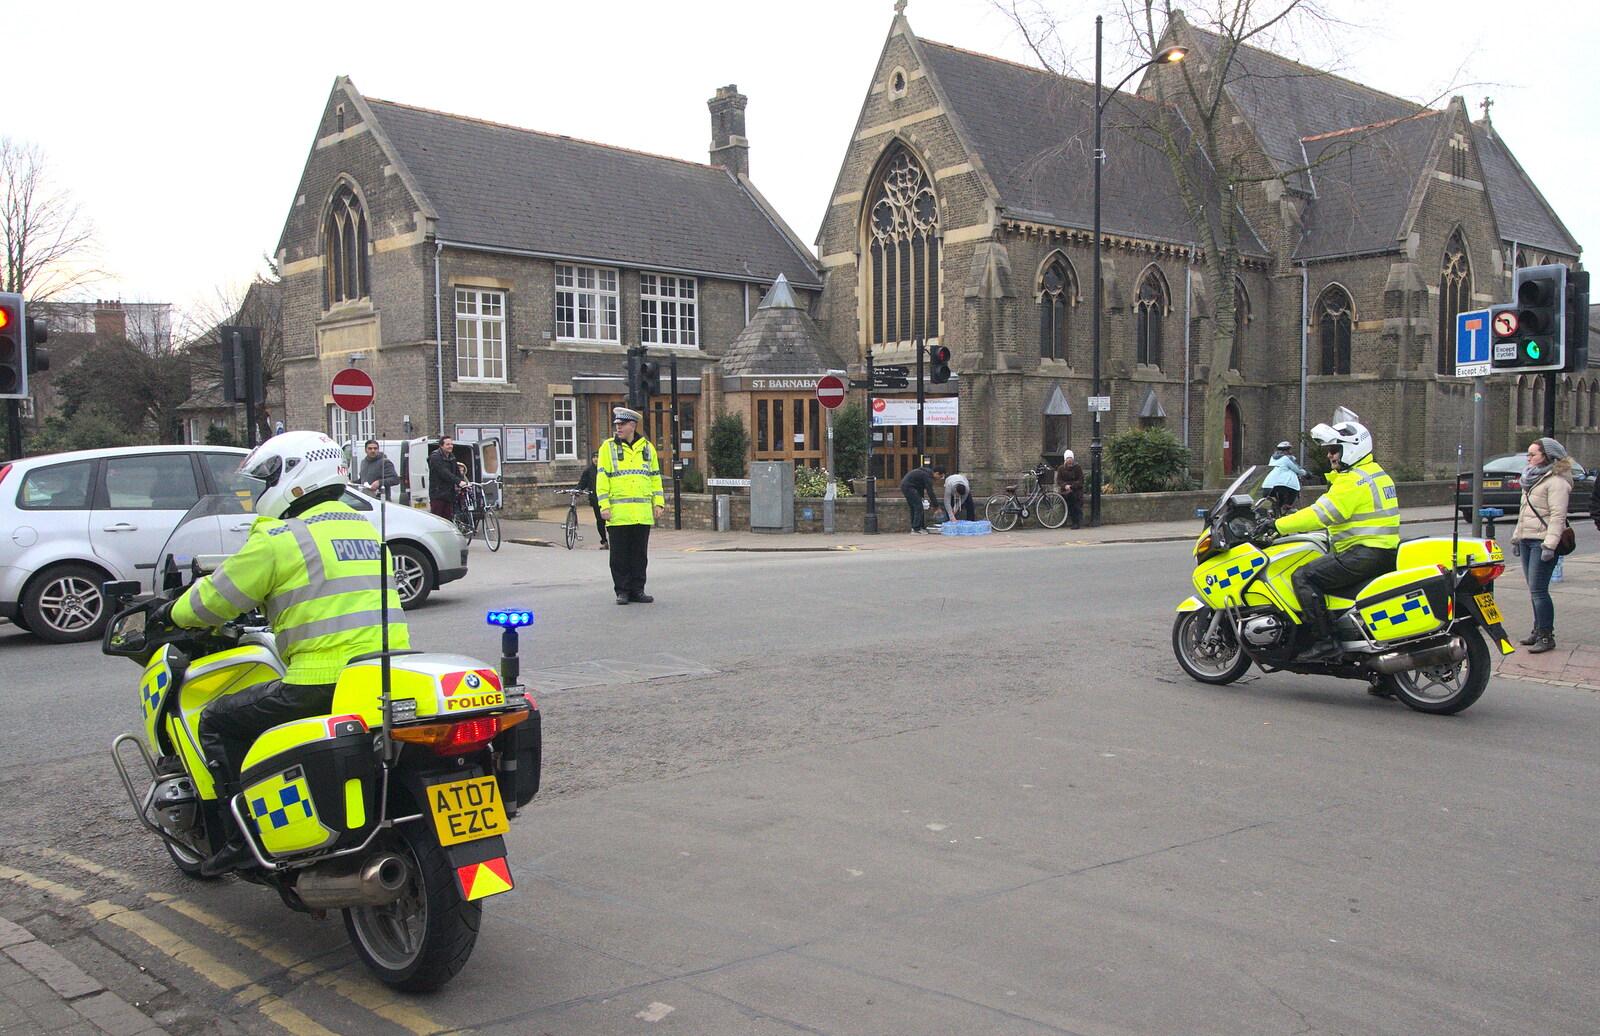 Rozzers block off the Gwydir Street junction from An Anti-Fascist March, Mill Road, Cambridge - 23rd February 2013